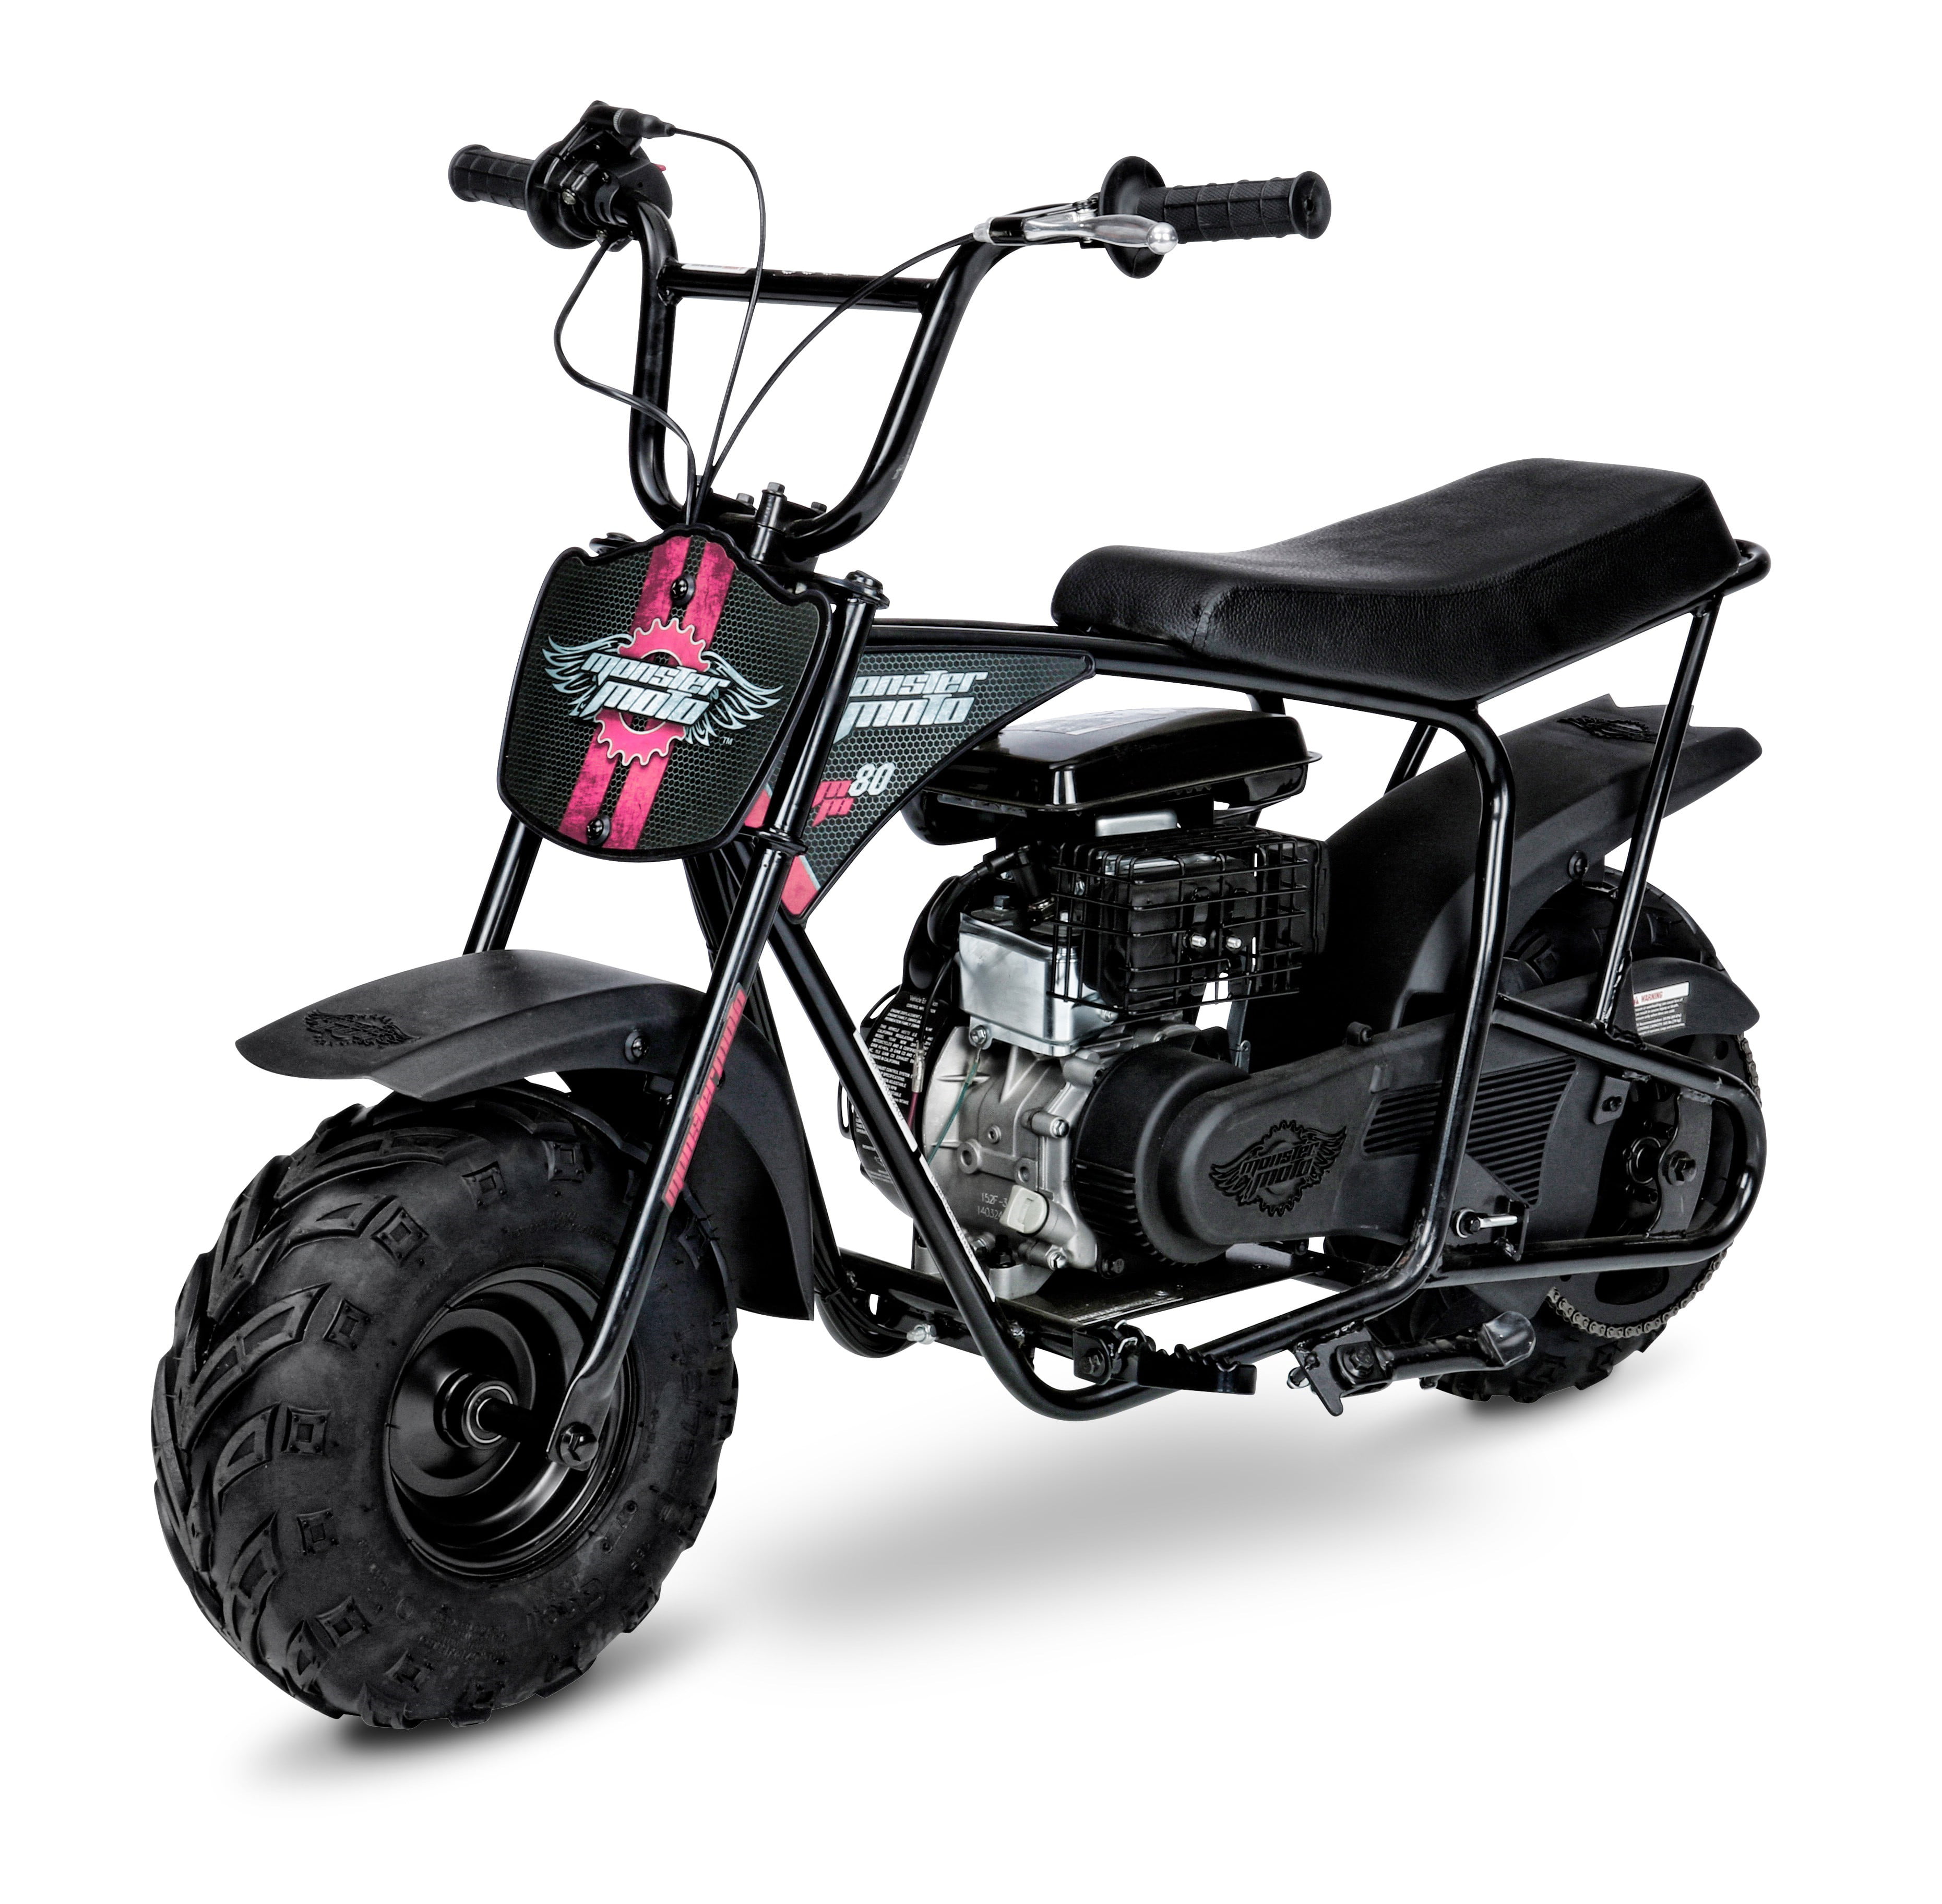 Monster Moto Classic Gas Powered Mini Bike Black With Pink And Red Decals Walmart Com Walmart Com